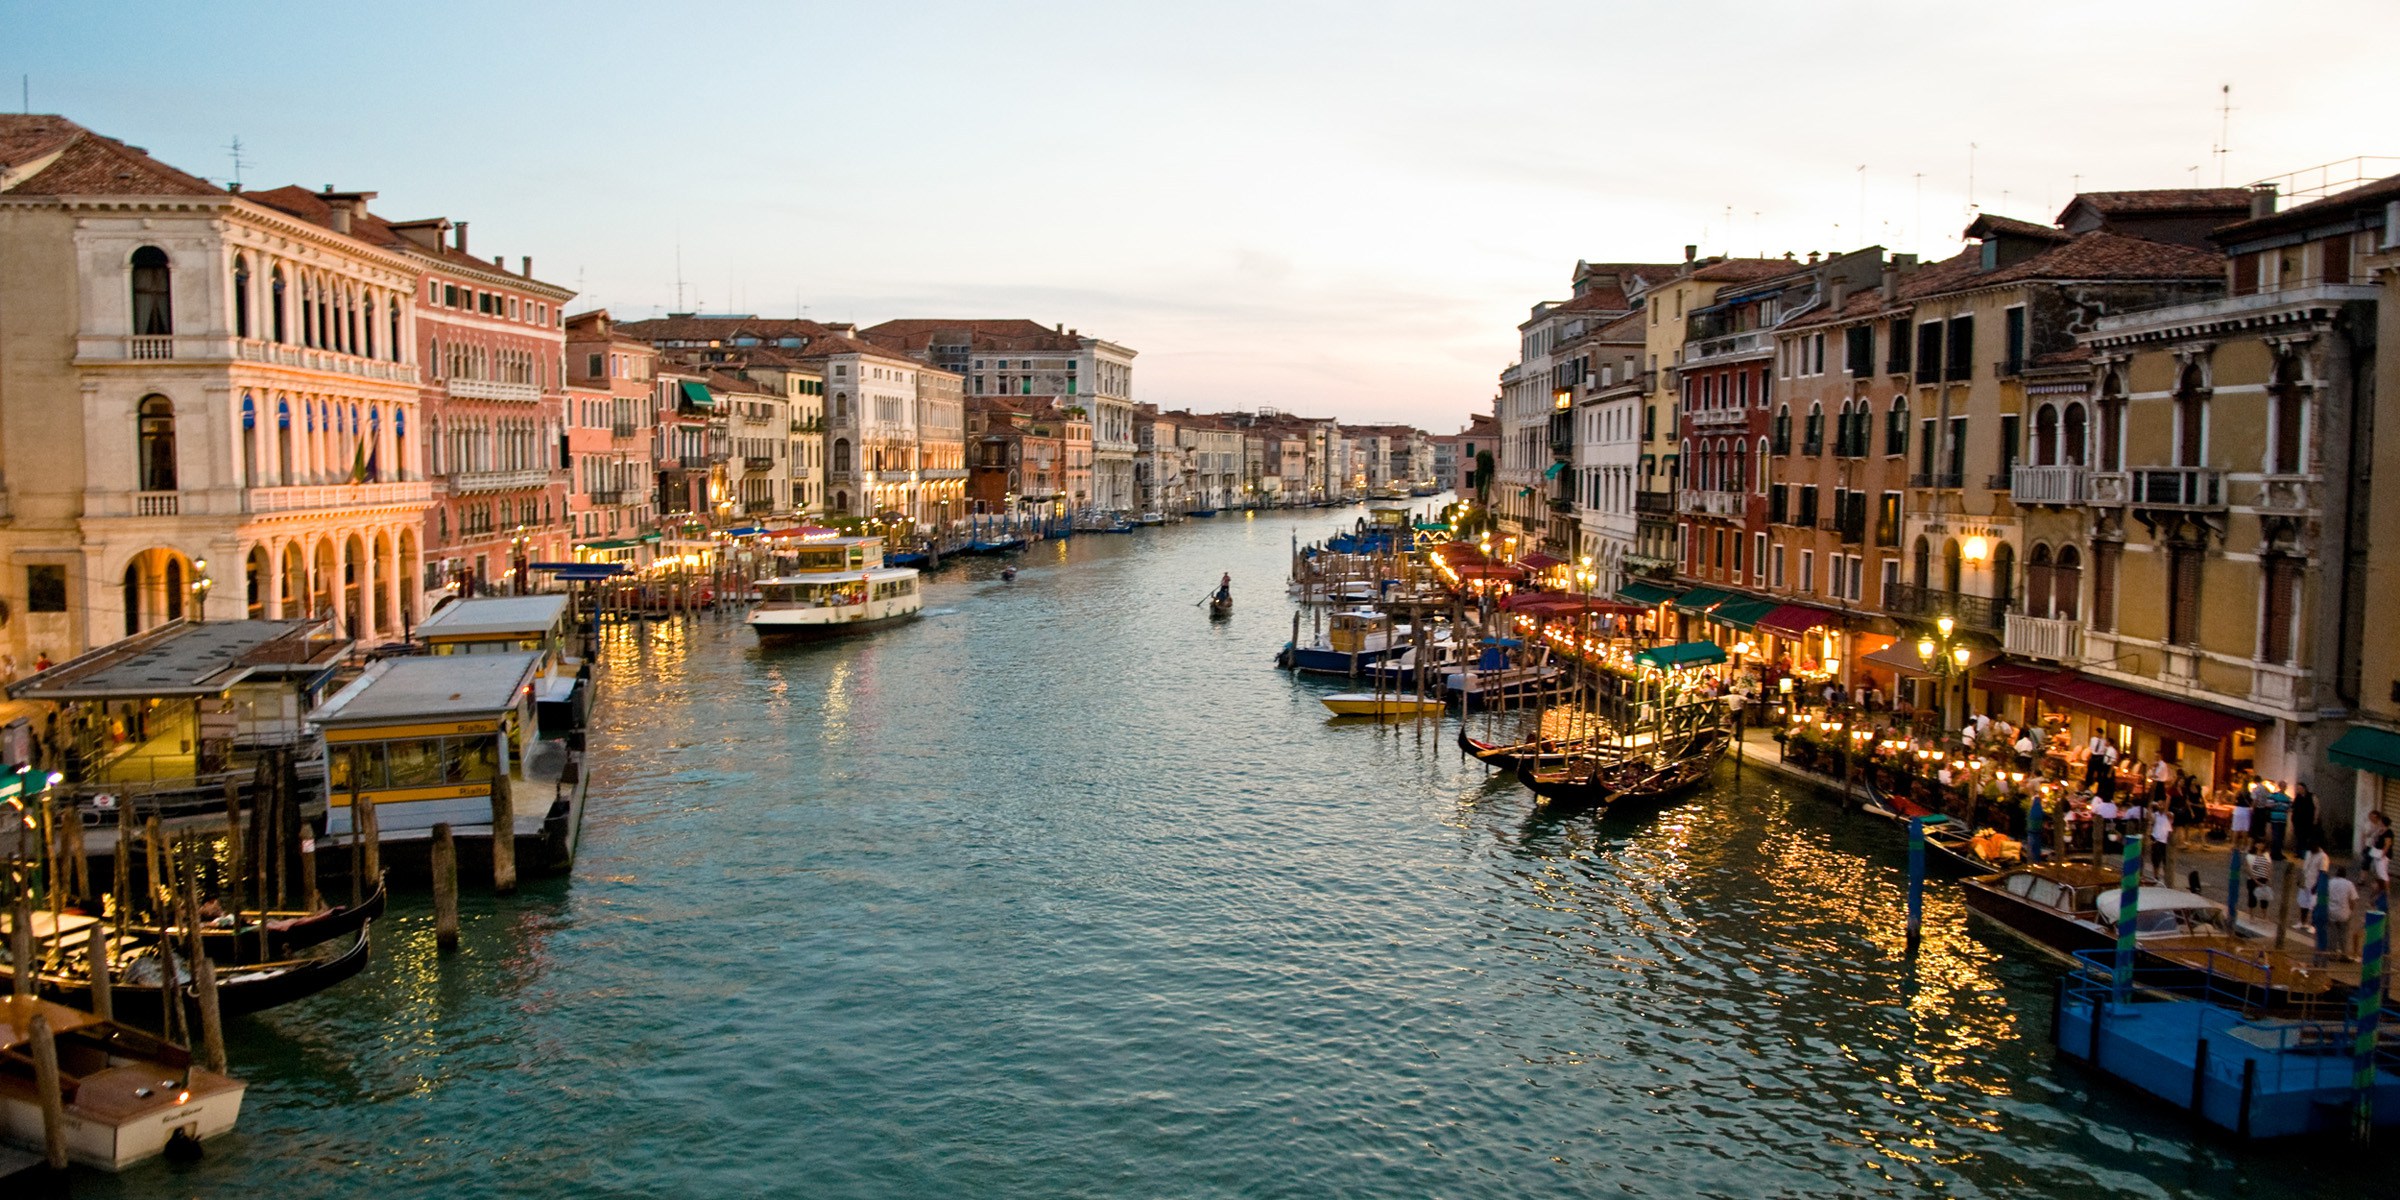 Venice, Italy - Beautiful Places to Visit